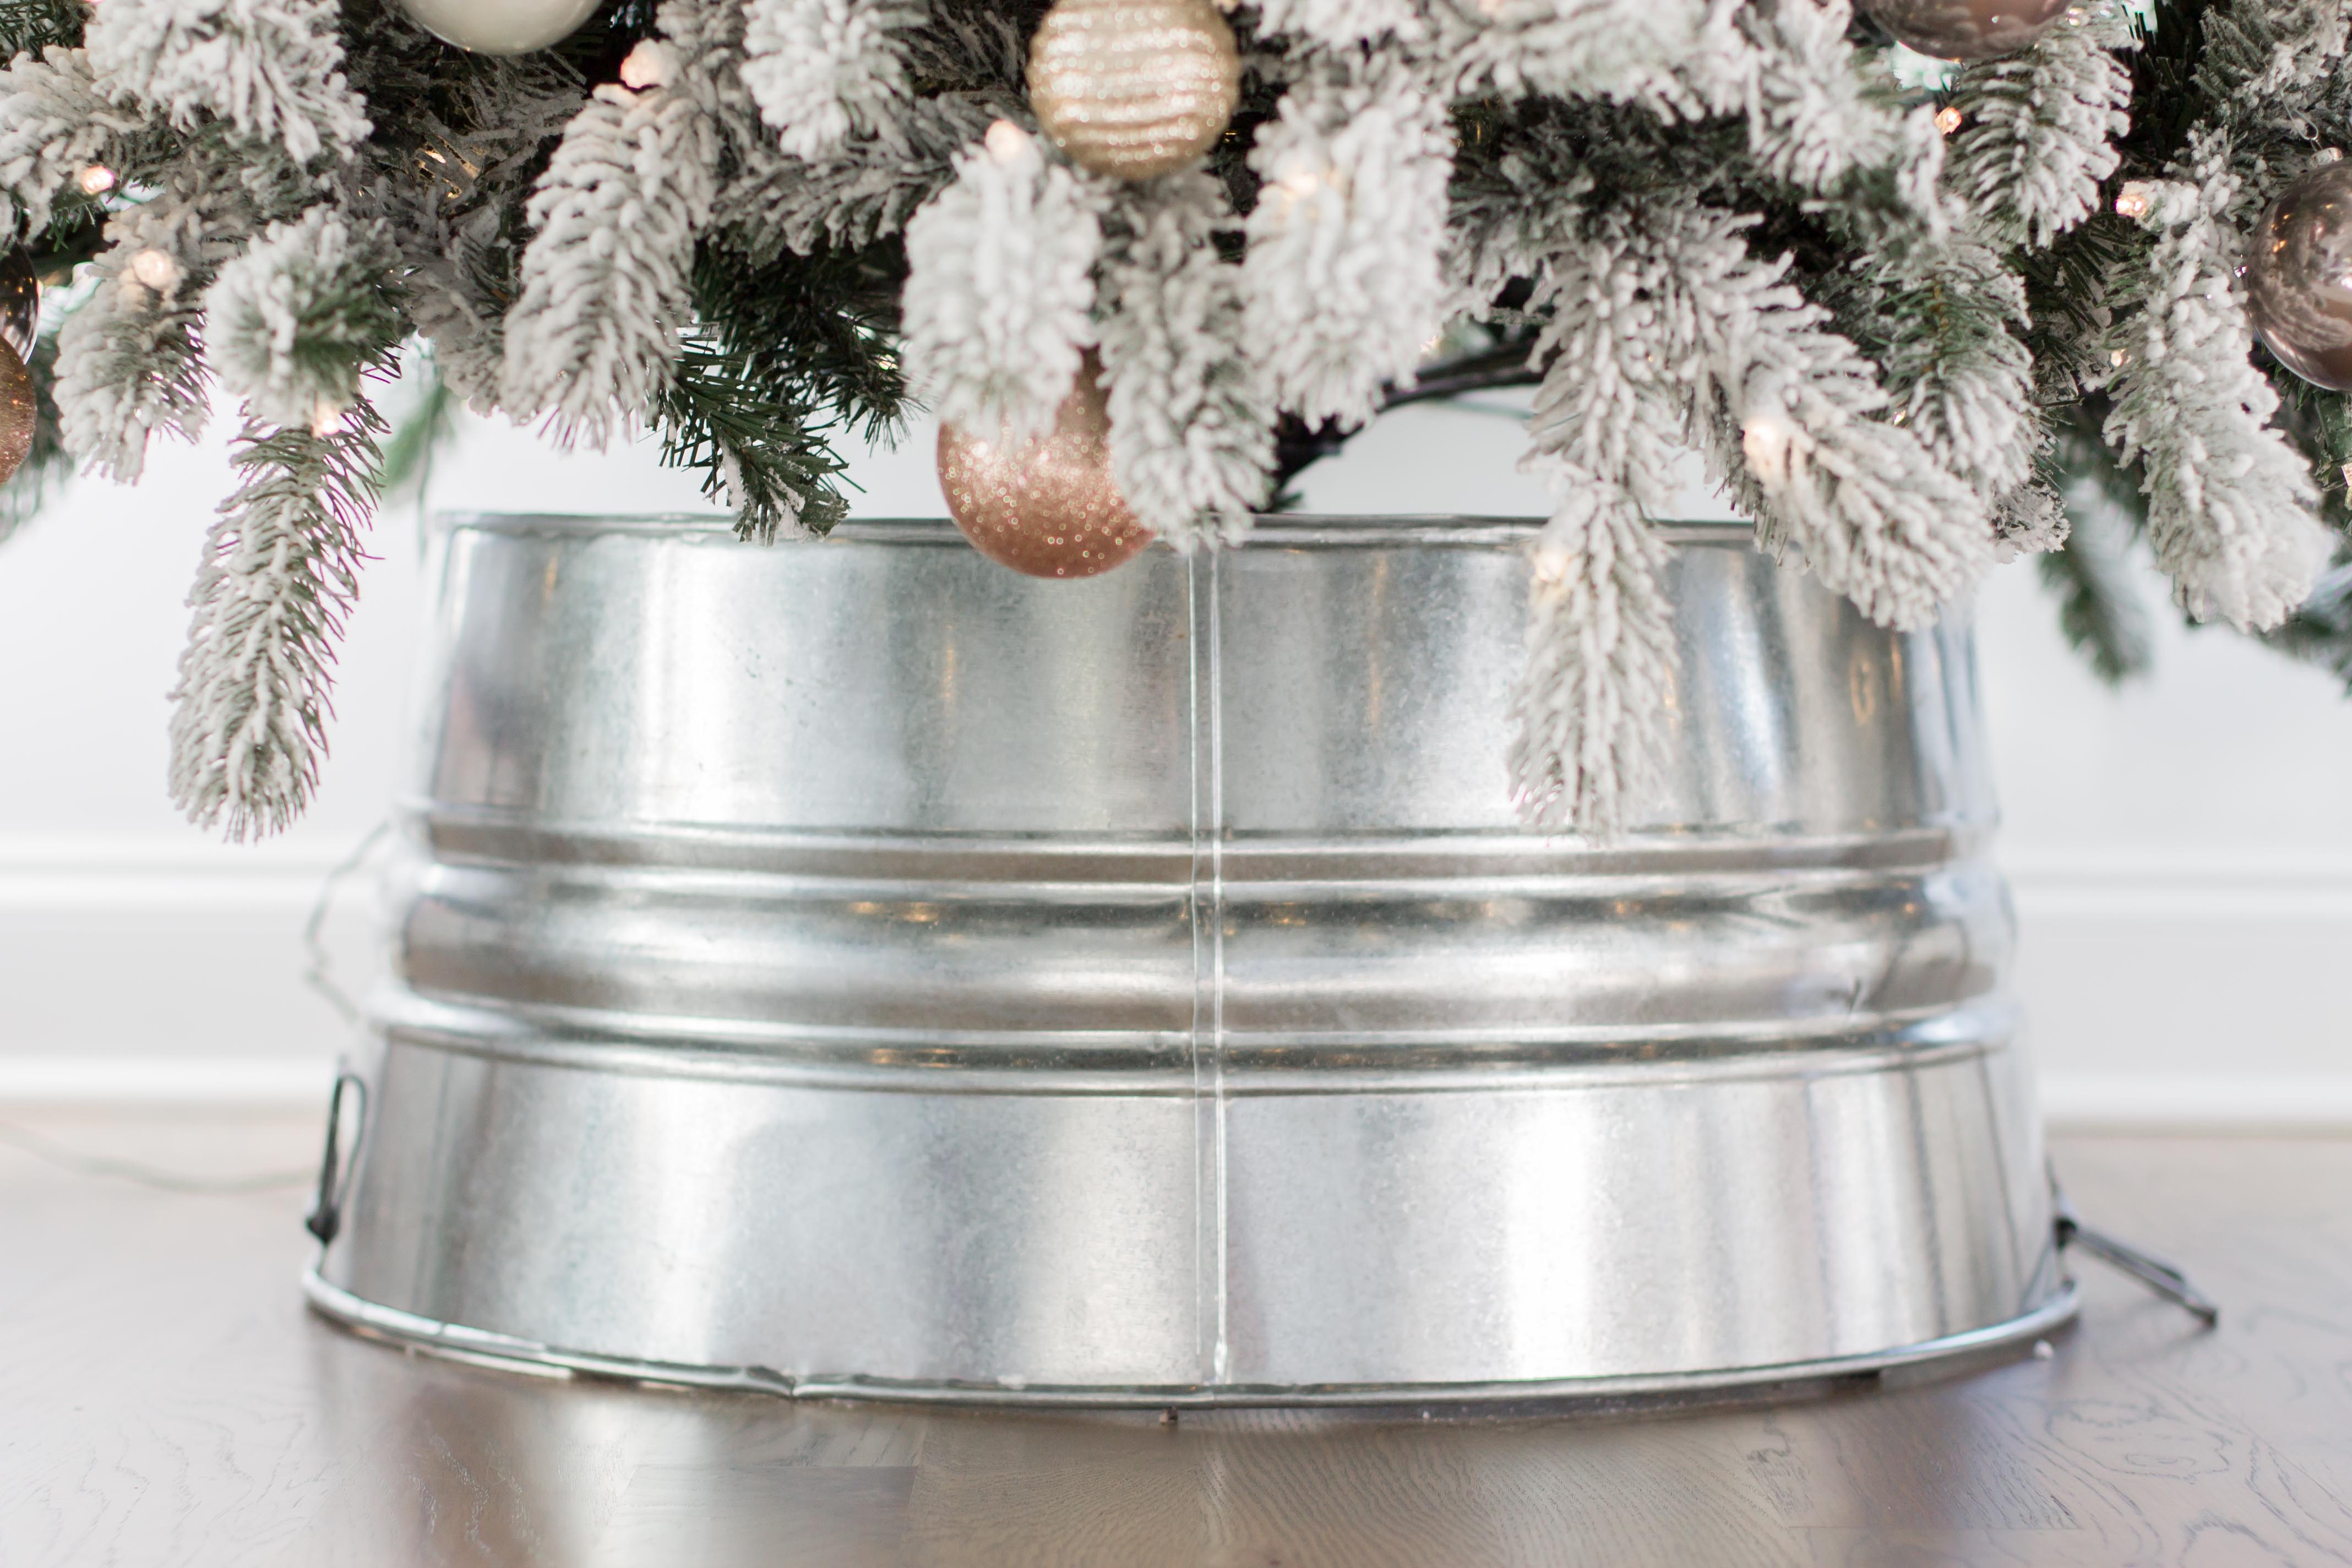 Your galvanized tub Christmas tree collar will have a little bit of stretch...